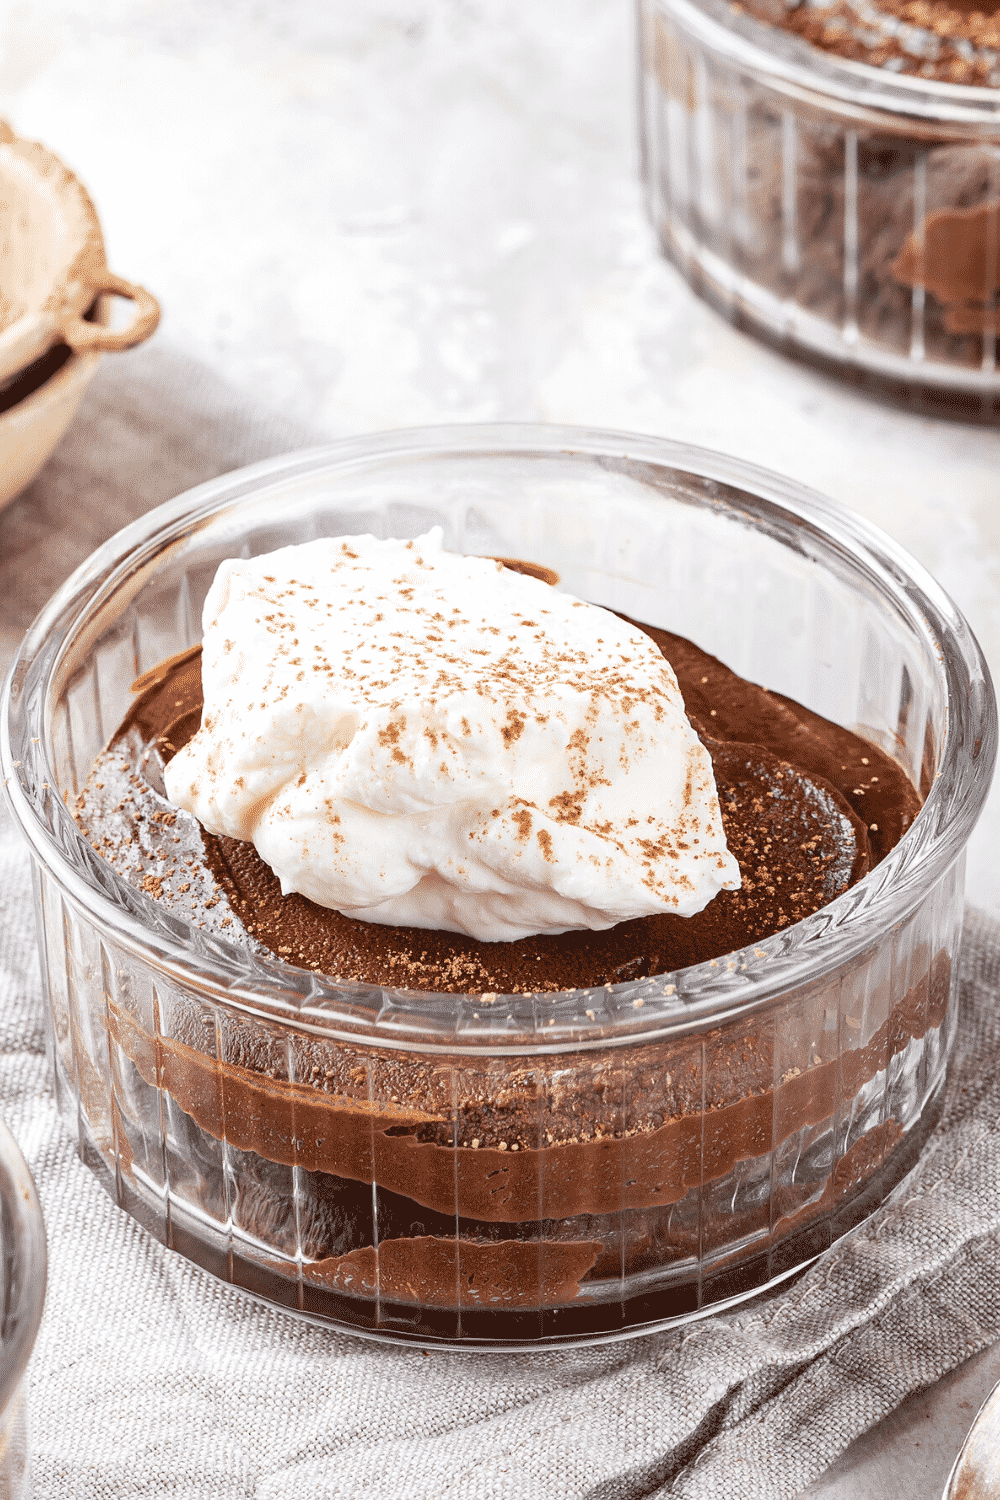 A small glass bowl filled with chocolate mousse. A dollop of whipped cream is on top of the mouse.